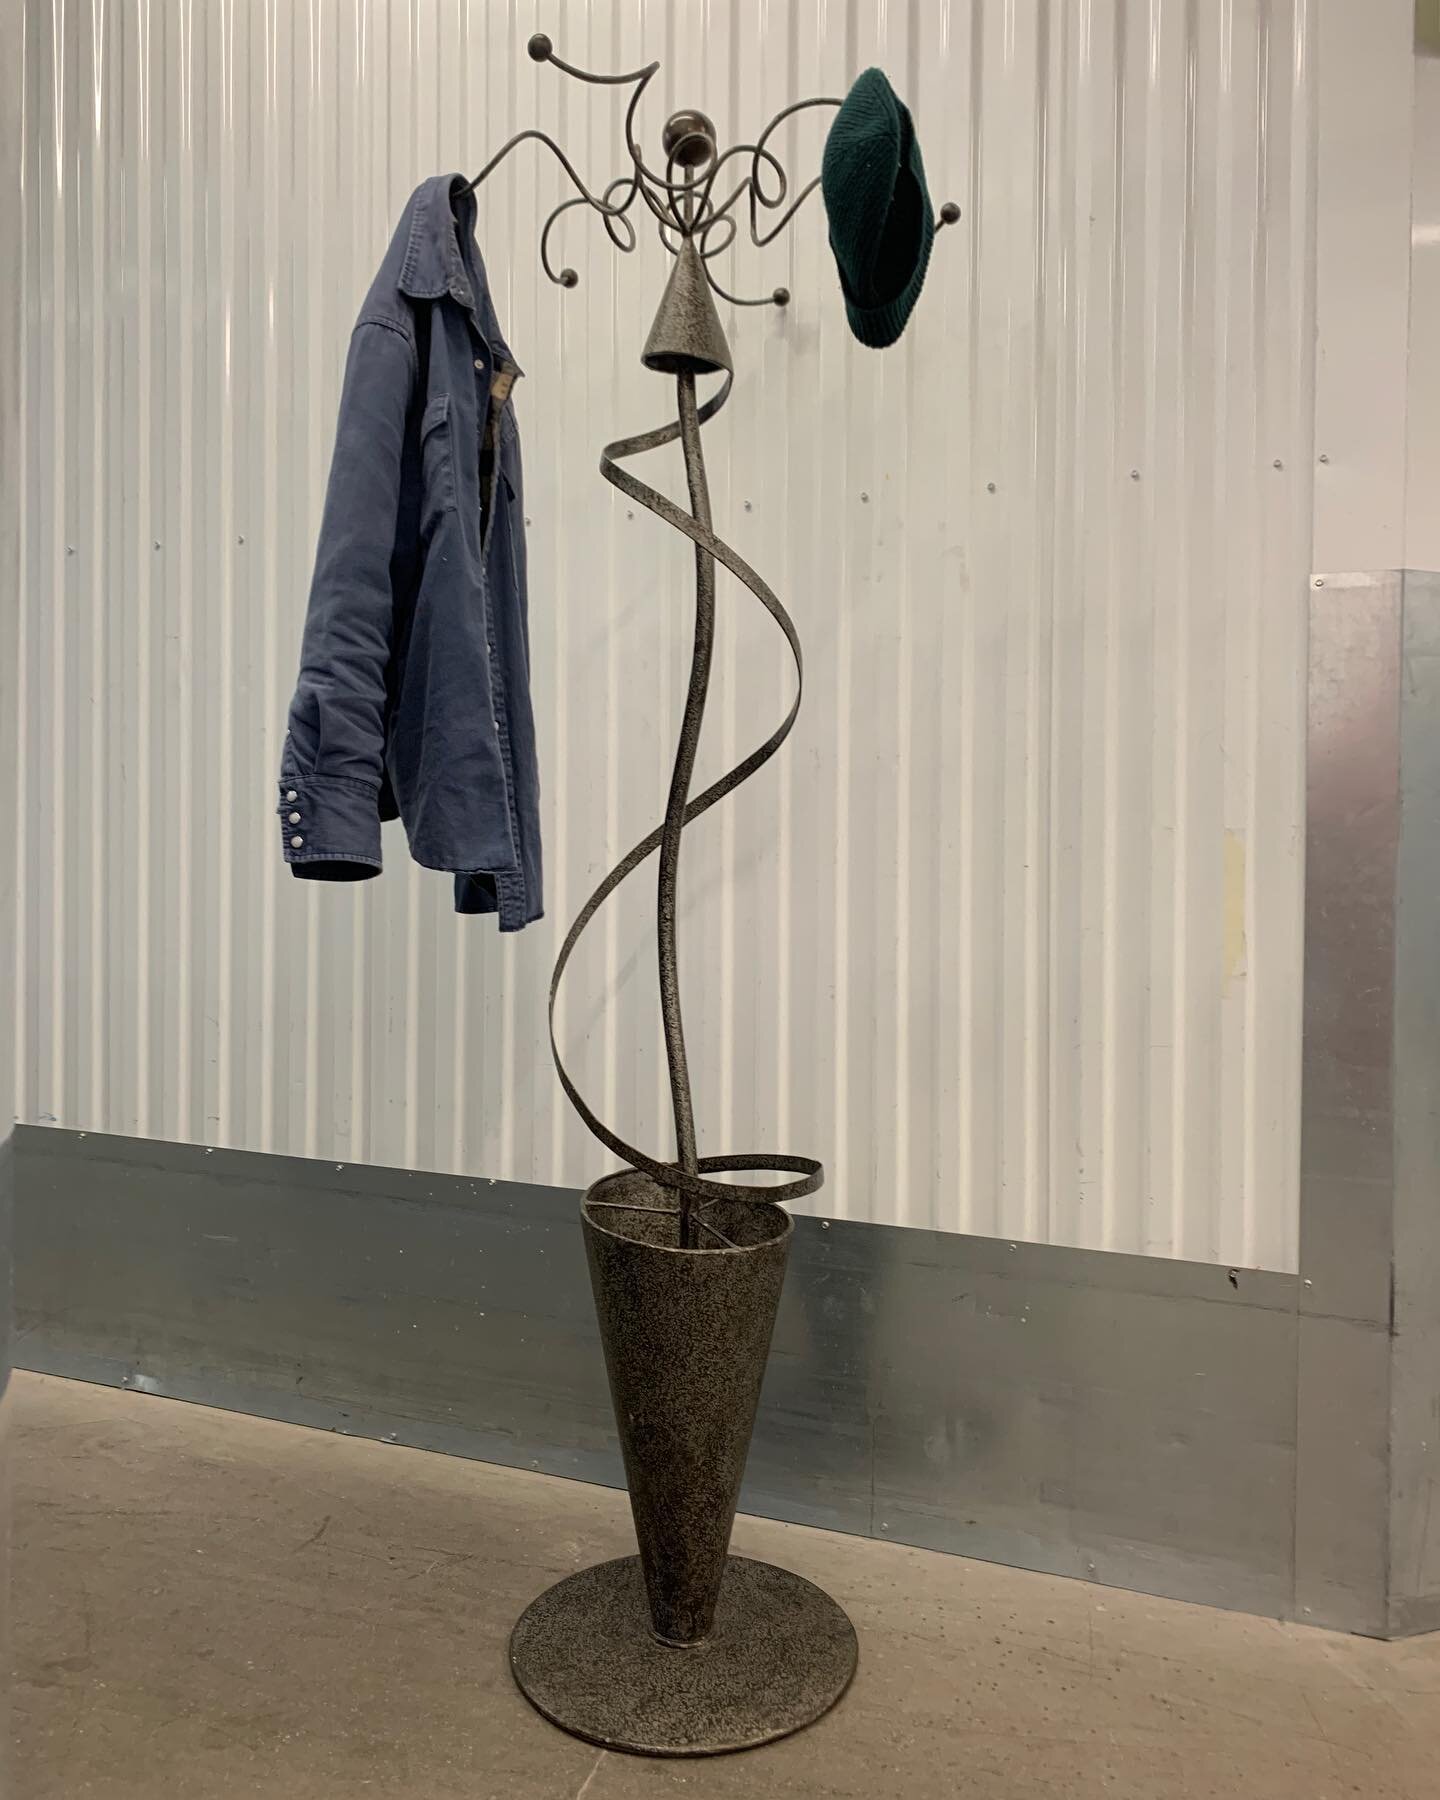 For Sale - 90s postmodern metal coat stand with umbrella holder. 

Wonderfully bonkers piece! Textured metal, swooping shapes and curly bits - this coat stand has it all. 

&pound;265 
Link in highlights 

#coatstand #hattree #coathooks #umbrellastan